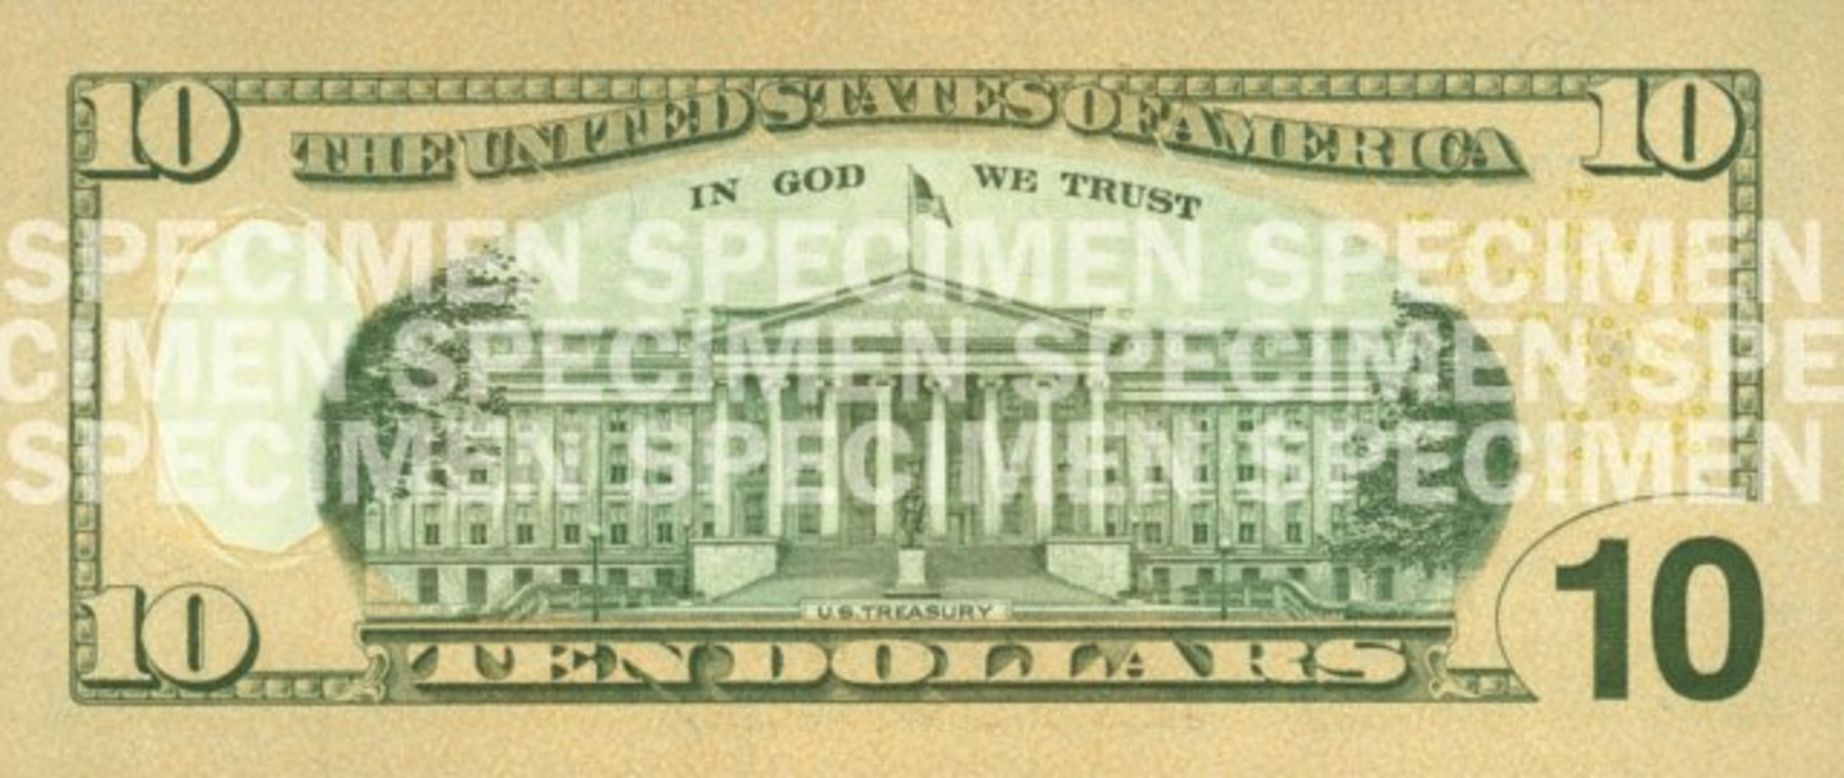 How the US Dollar Bill Has Evolved